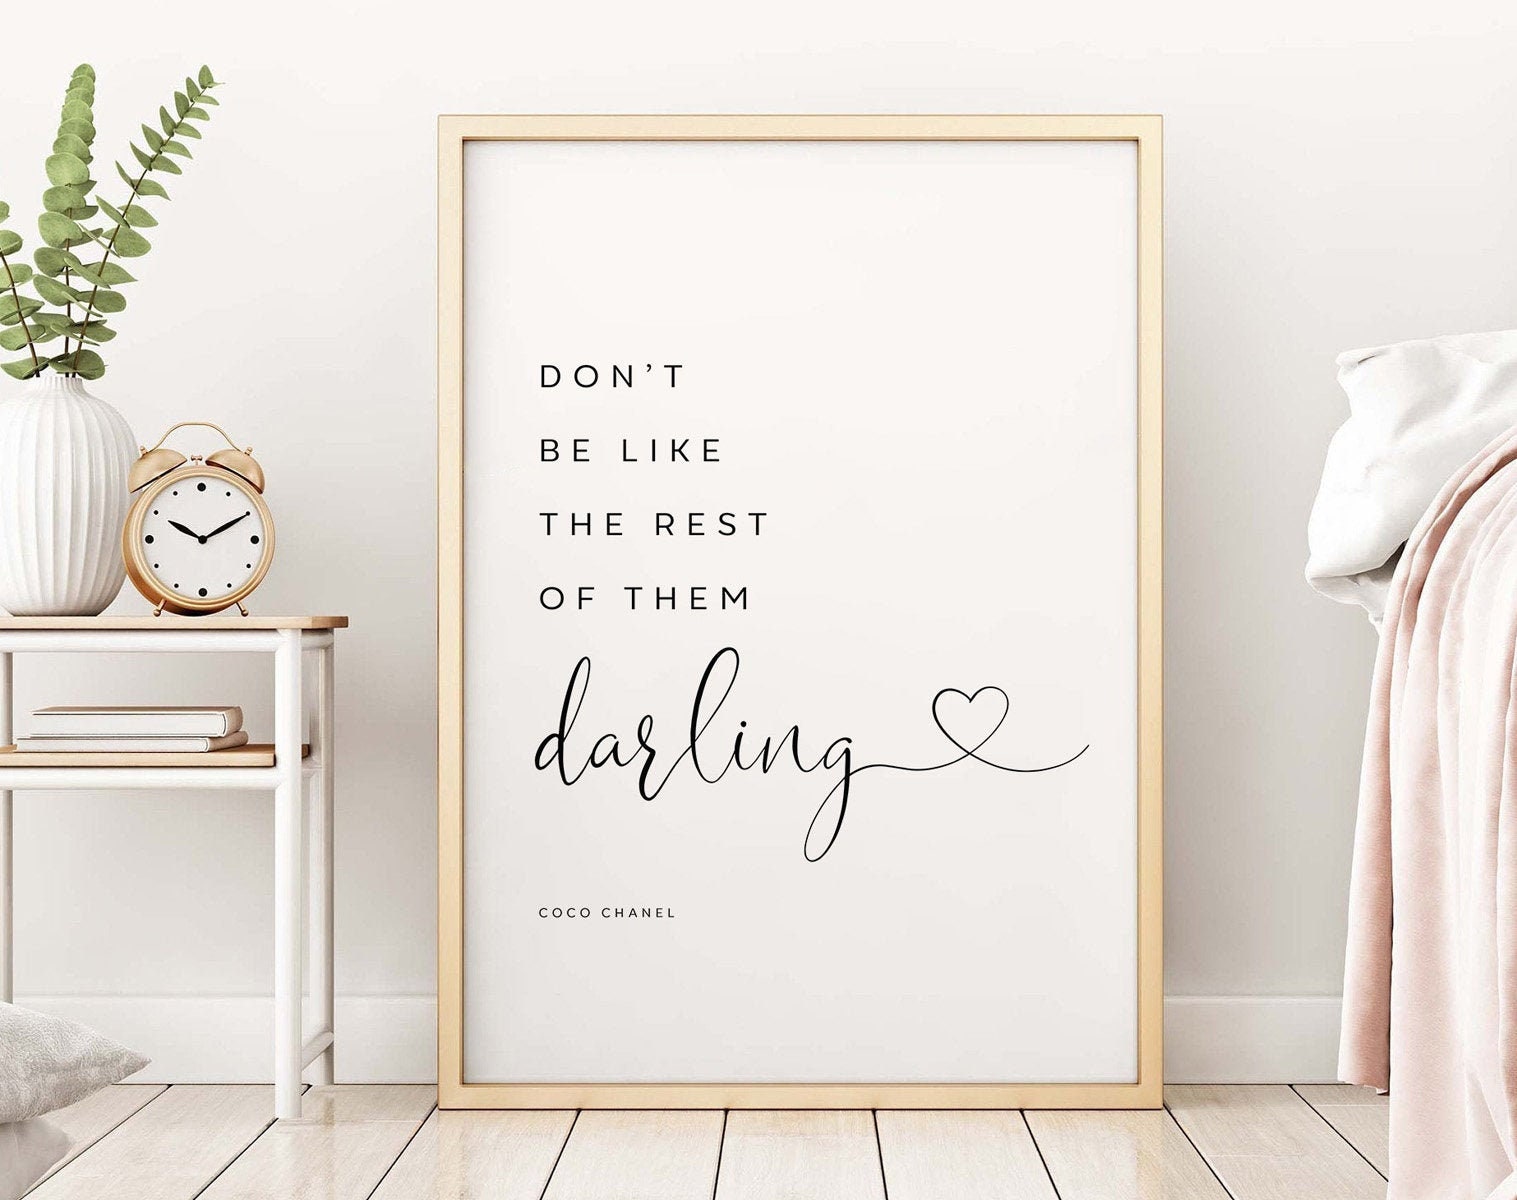 Don't Be Like The Rest of Them Darling - Coco Chanel Inspirational Quote -  Wall Art Decal - 20 x 25 - Fashion Quotes Vinyl Decal - Bedroom Wall